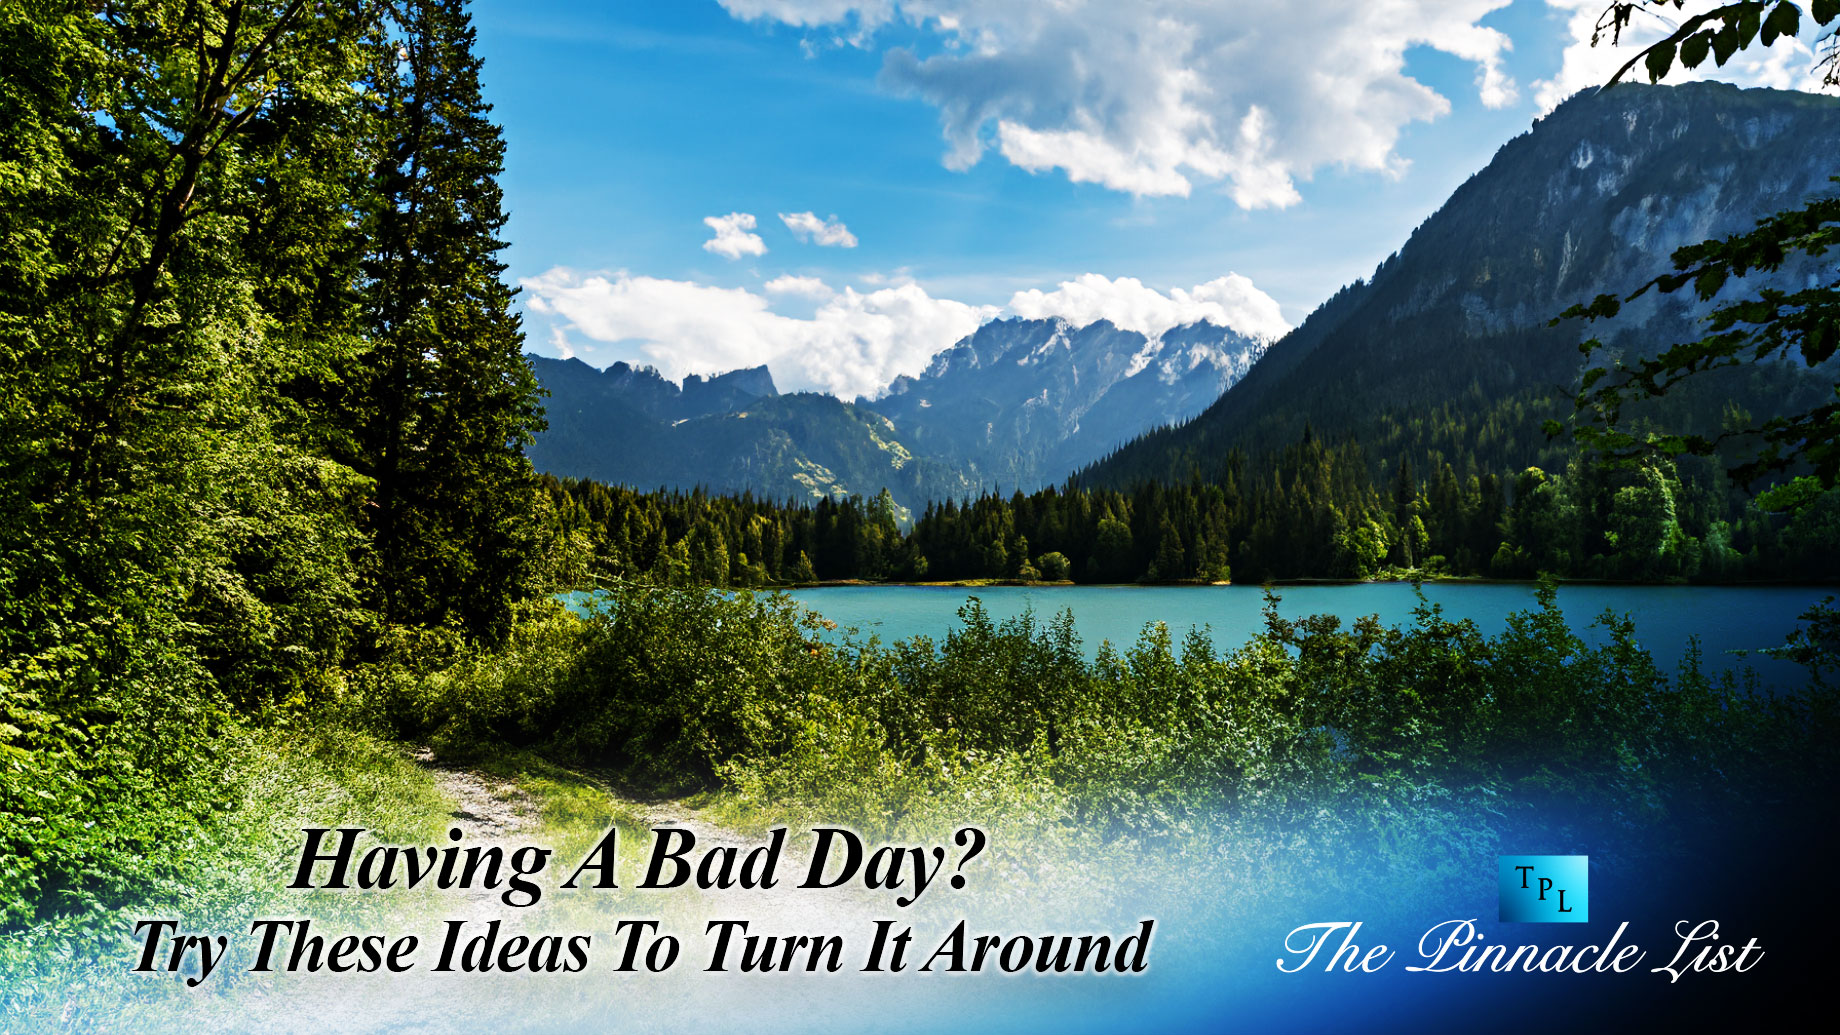 Having A Bad Day? Try These Ideas To Turn It Around